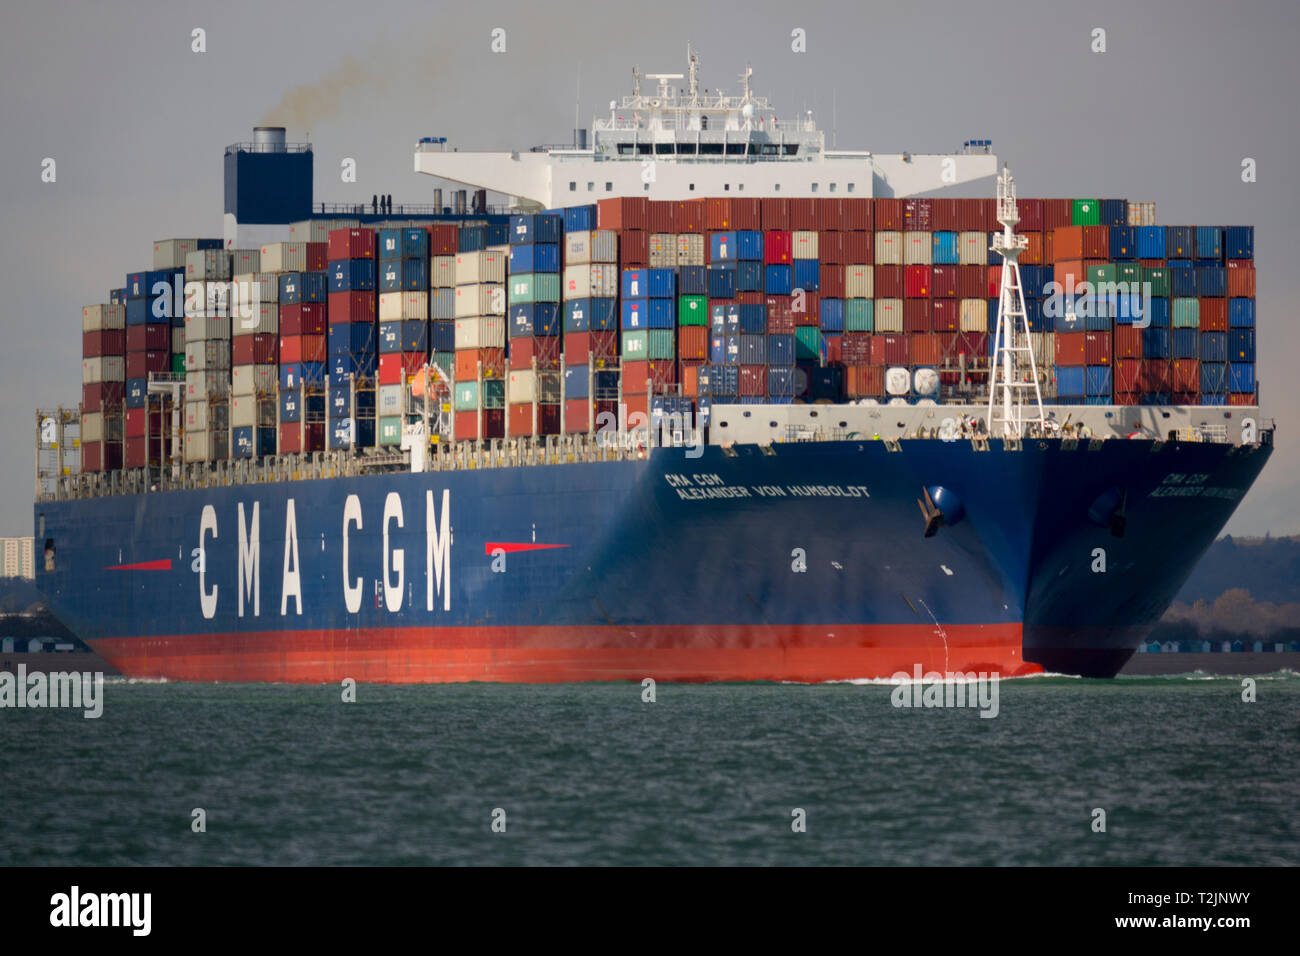 Brexit. Container, ship, CMA CGM, Alexander Von,Humboldt, Leaving, Southampton,Container, termianal,The Solent, One of the, largest, container, ships, Stock Photo